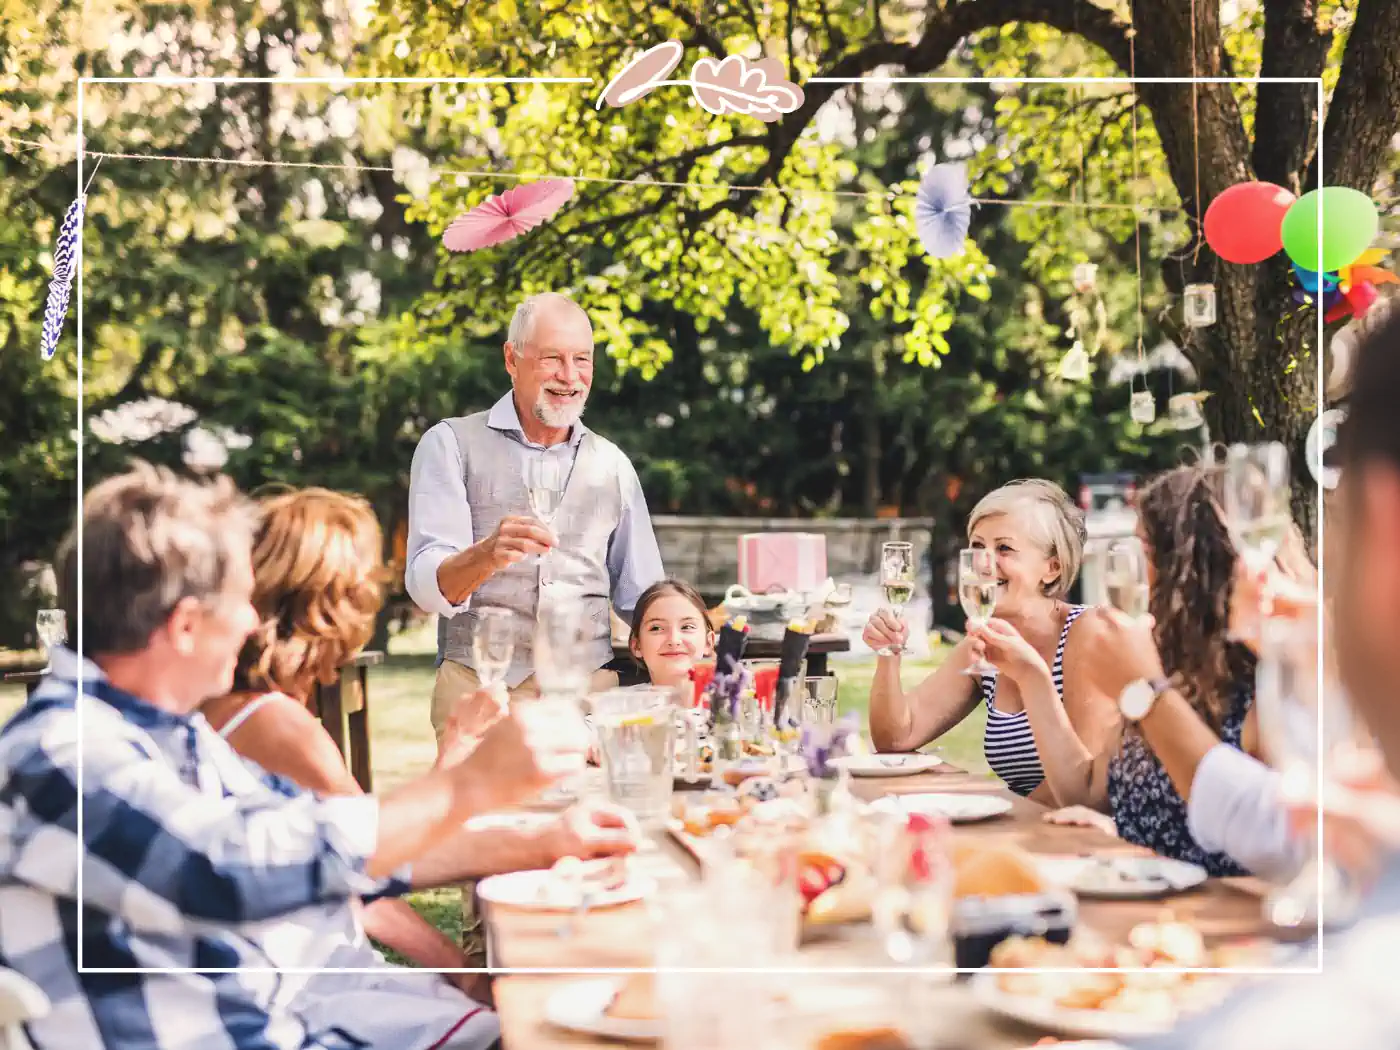 An outdoor family gathering with adults and children seated around a table, celebrating with food and drinks. Fabulous Flowers and Gifts - Birthday Collection.